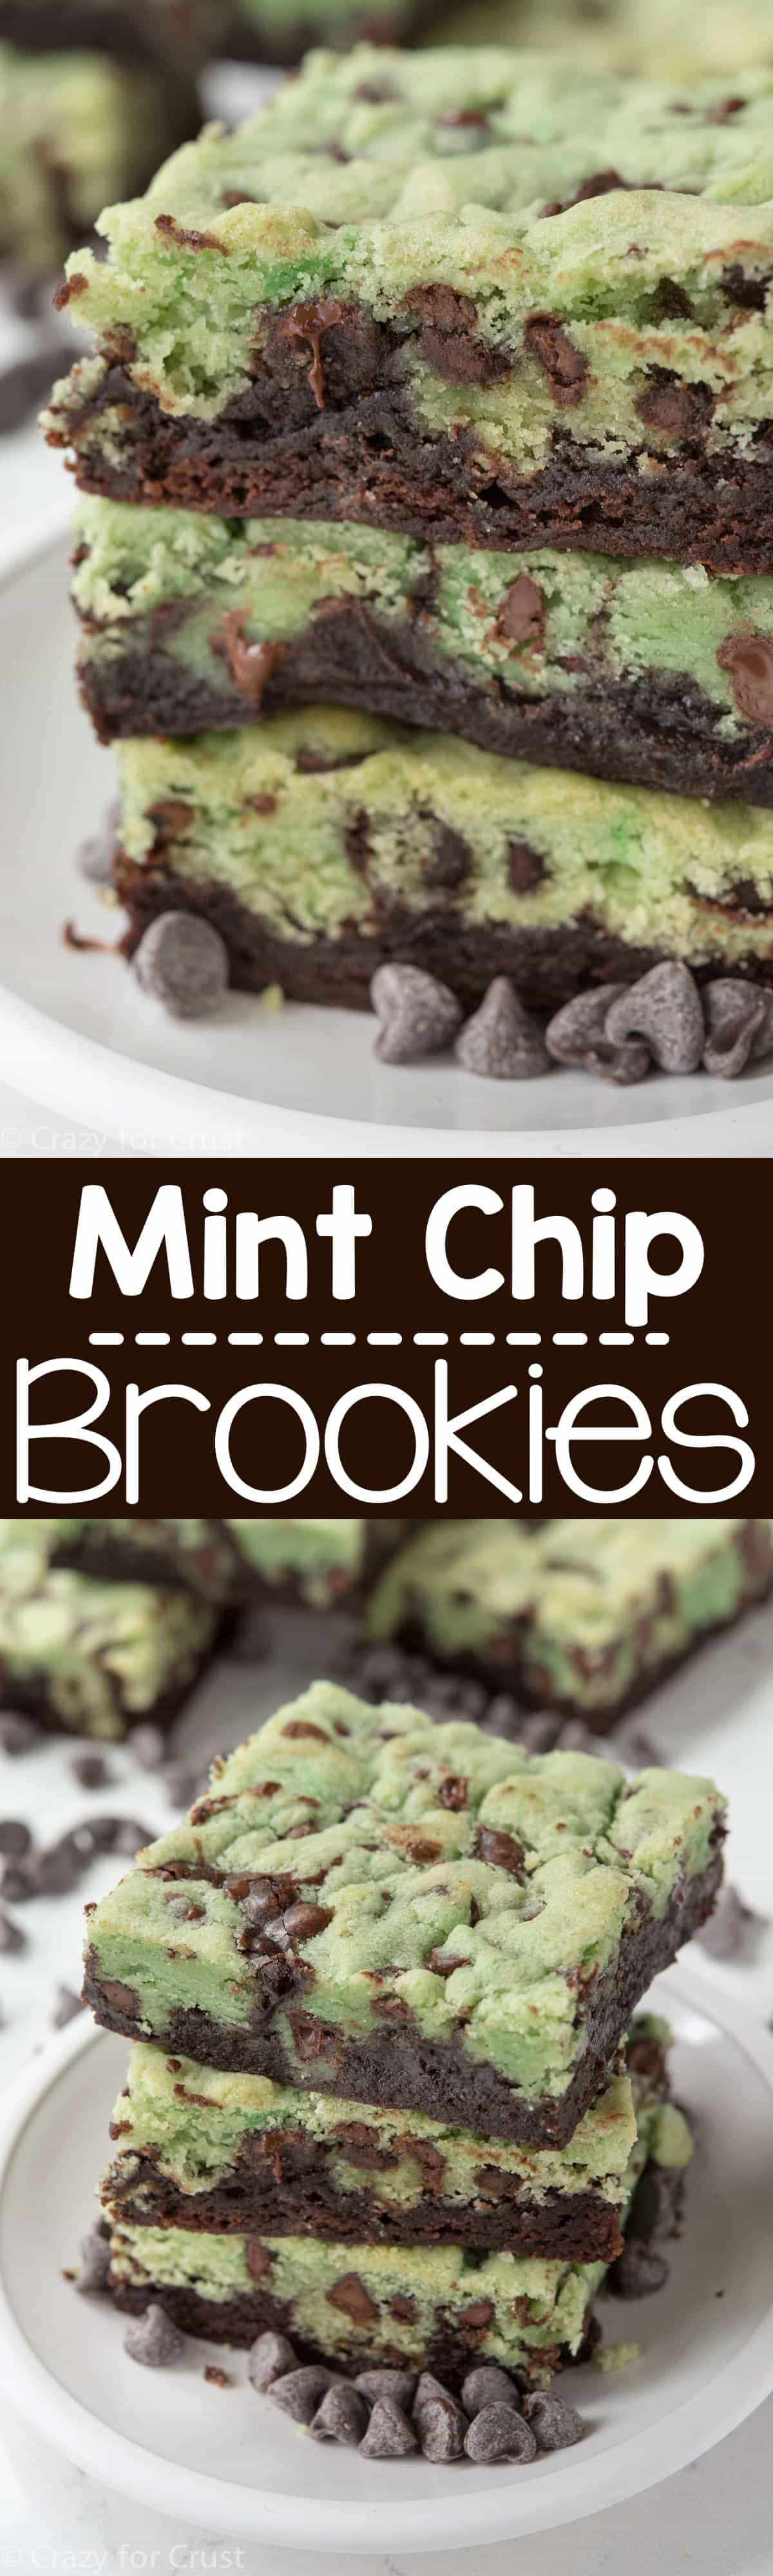 Mint Chip Brookies - this easy recipe combines brownies with mint chip chocolate chip cookies! Perfect for mint chip lovers!